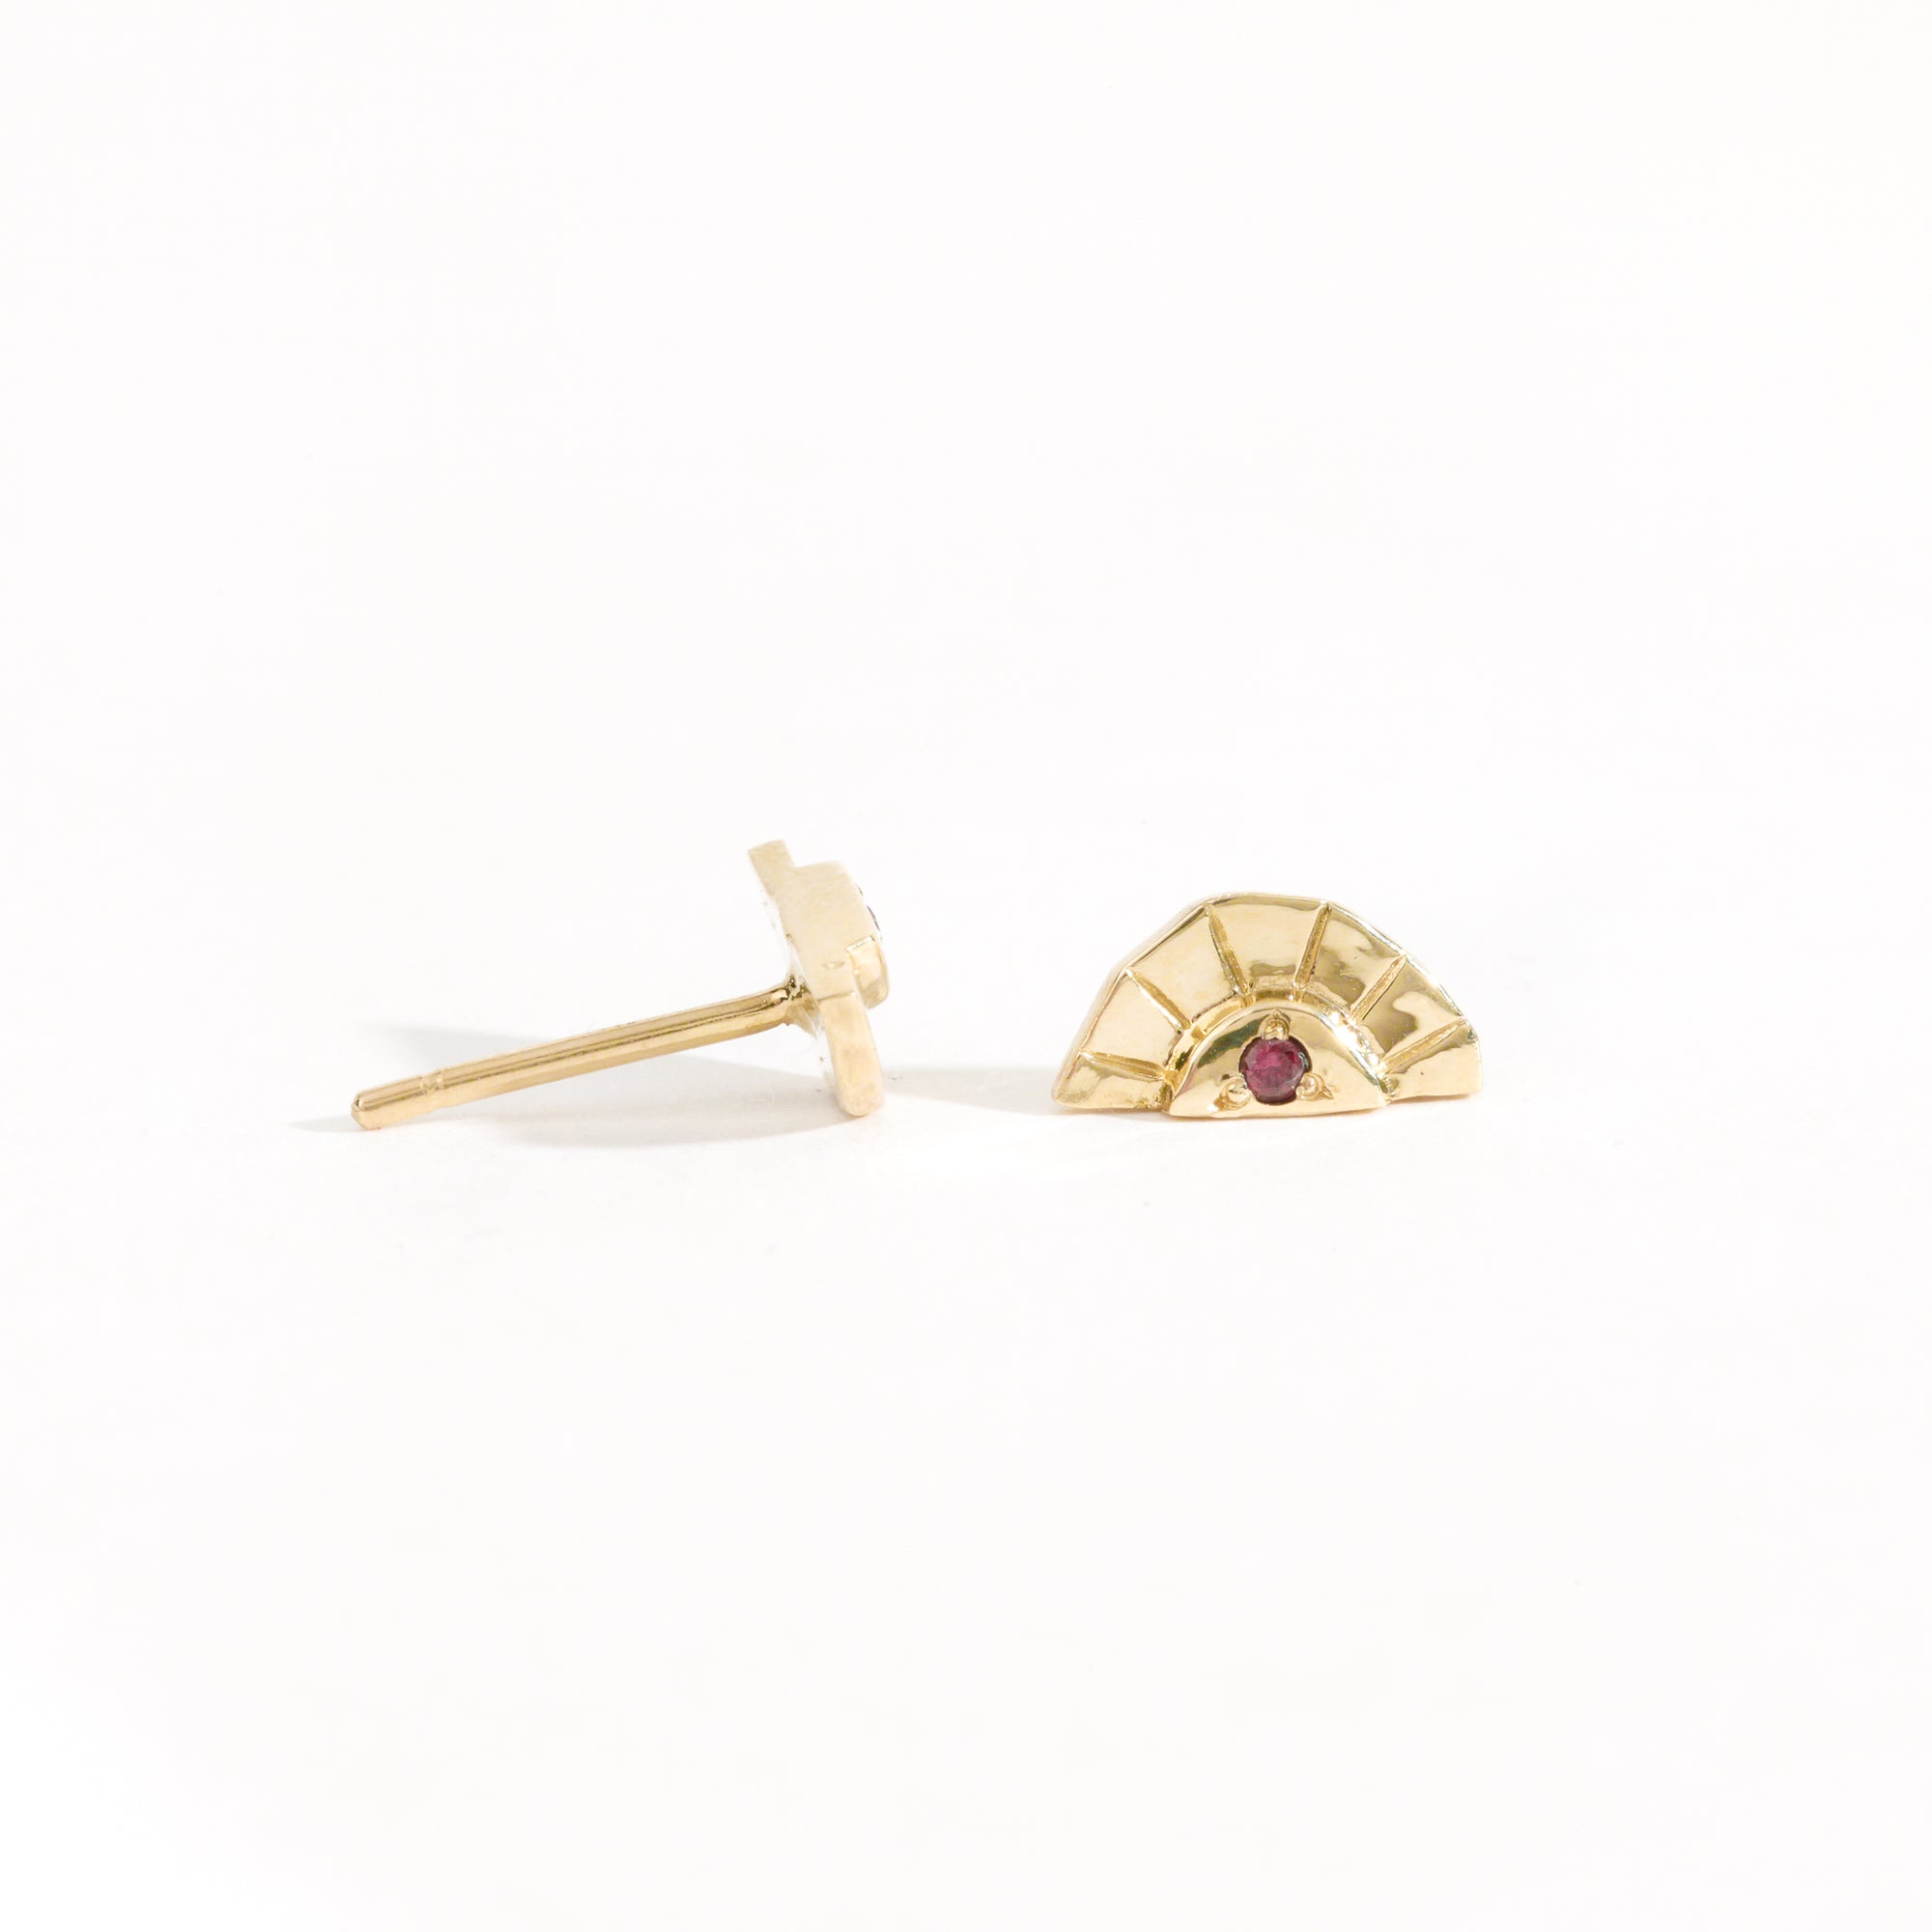 Rising sun earrings with centre red sapphire crafted in 9ct yellow gold by Black Finch Jewellery